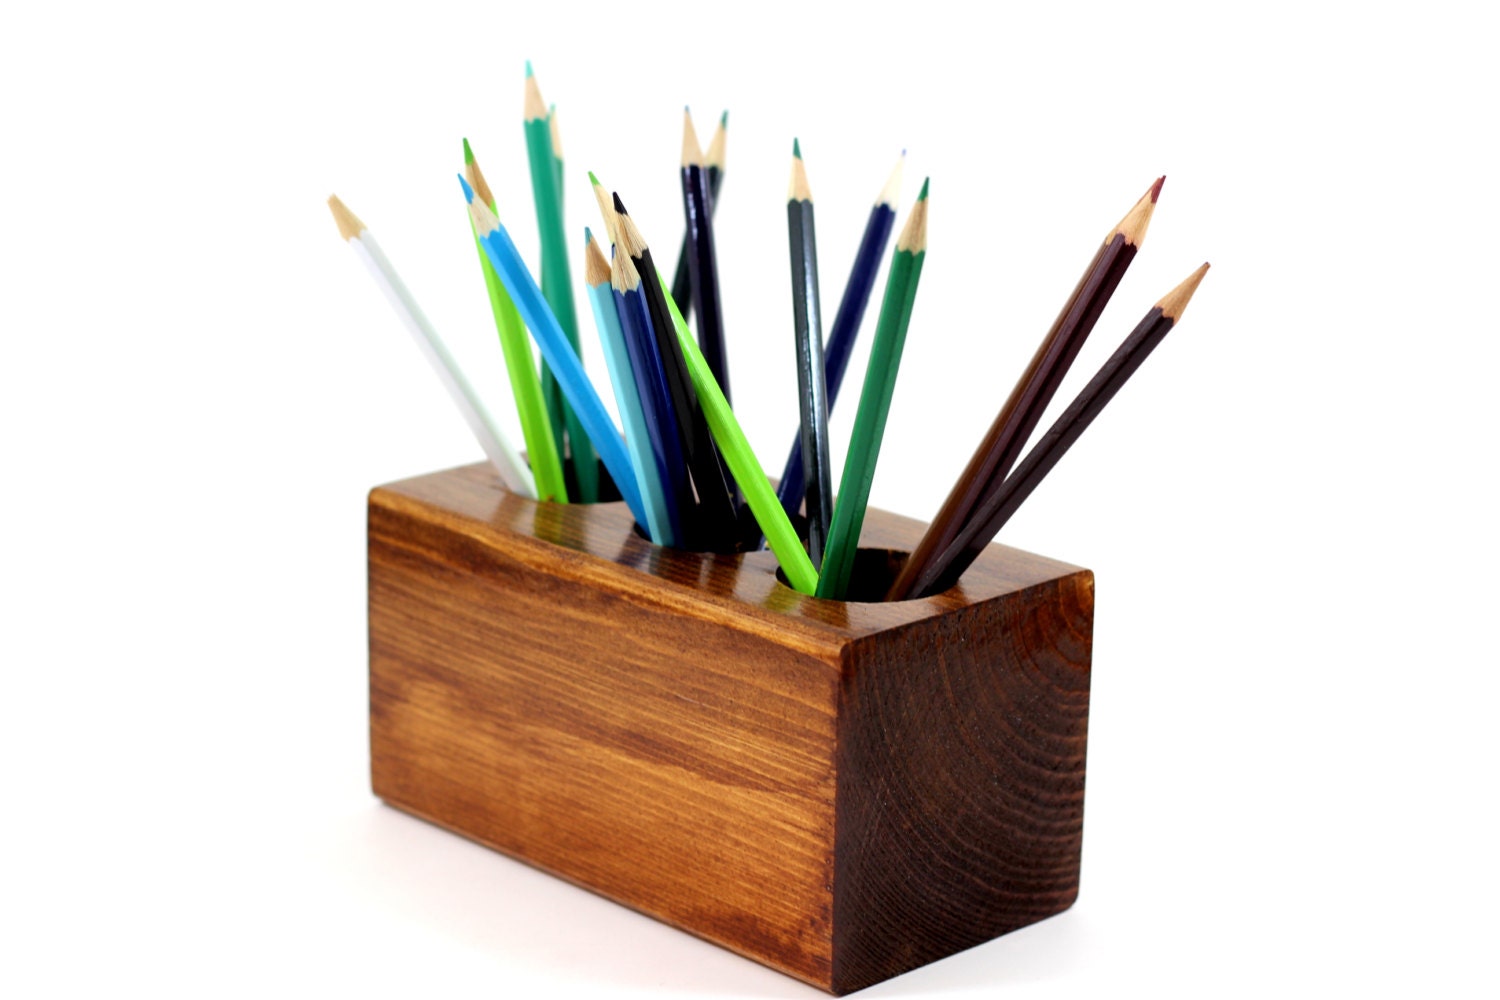 Wooden Pencil Holder | www.imgkid.com - The Image Kid Has It!